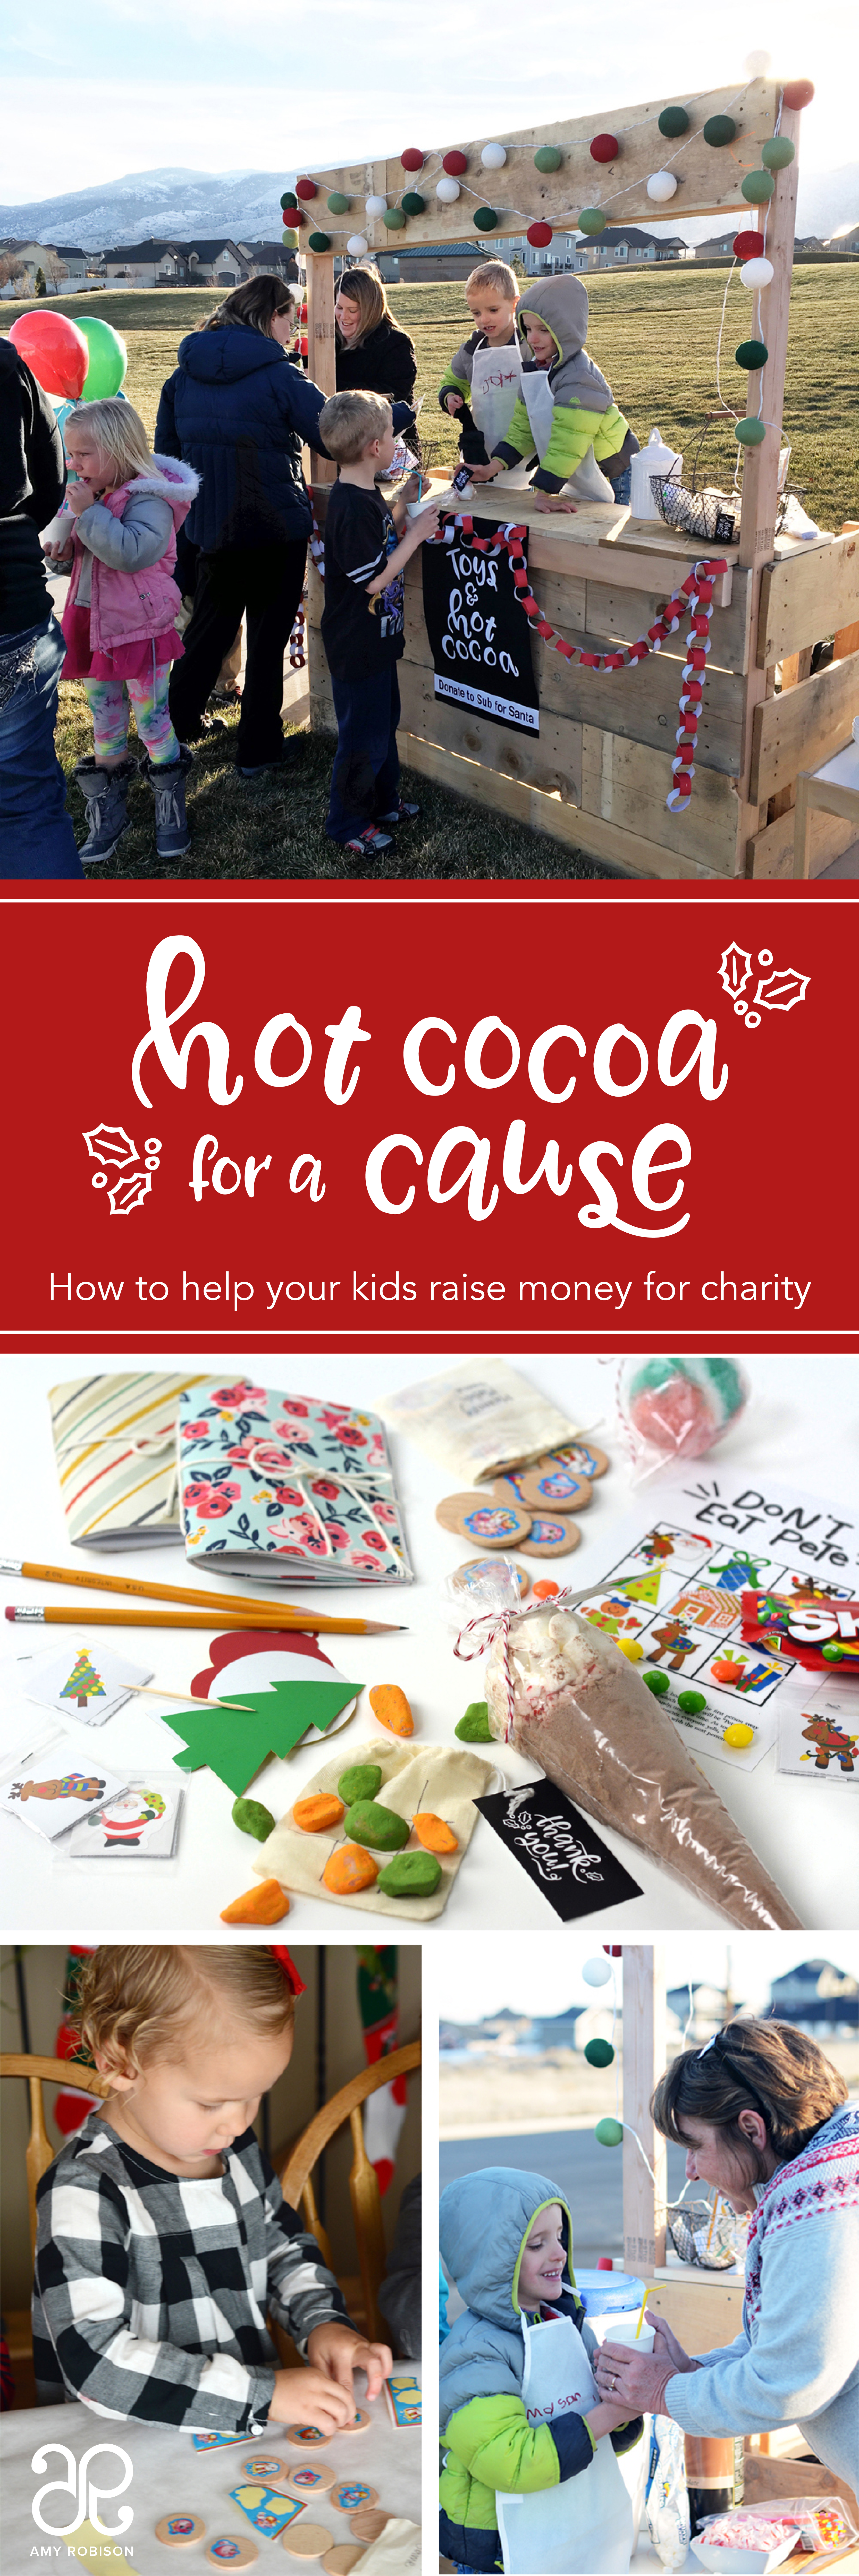 hot cocoa for a cause helping kids raise money for charity at Christmas #christmas #hotcocoastand